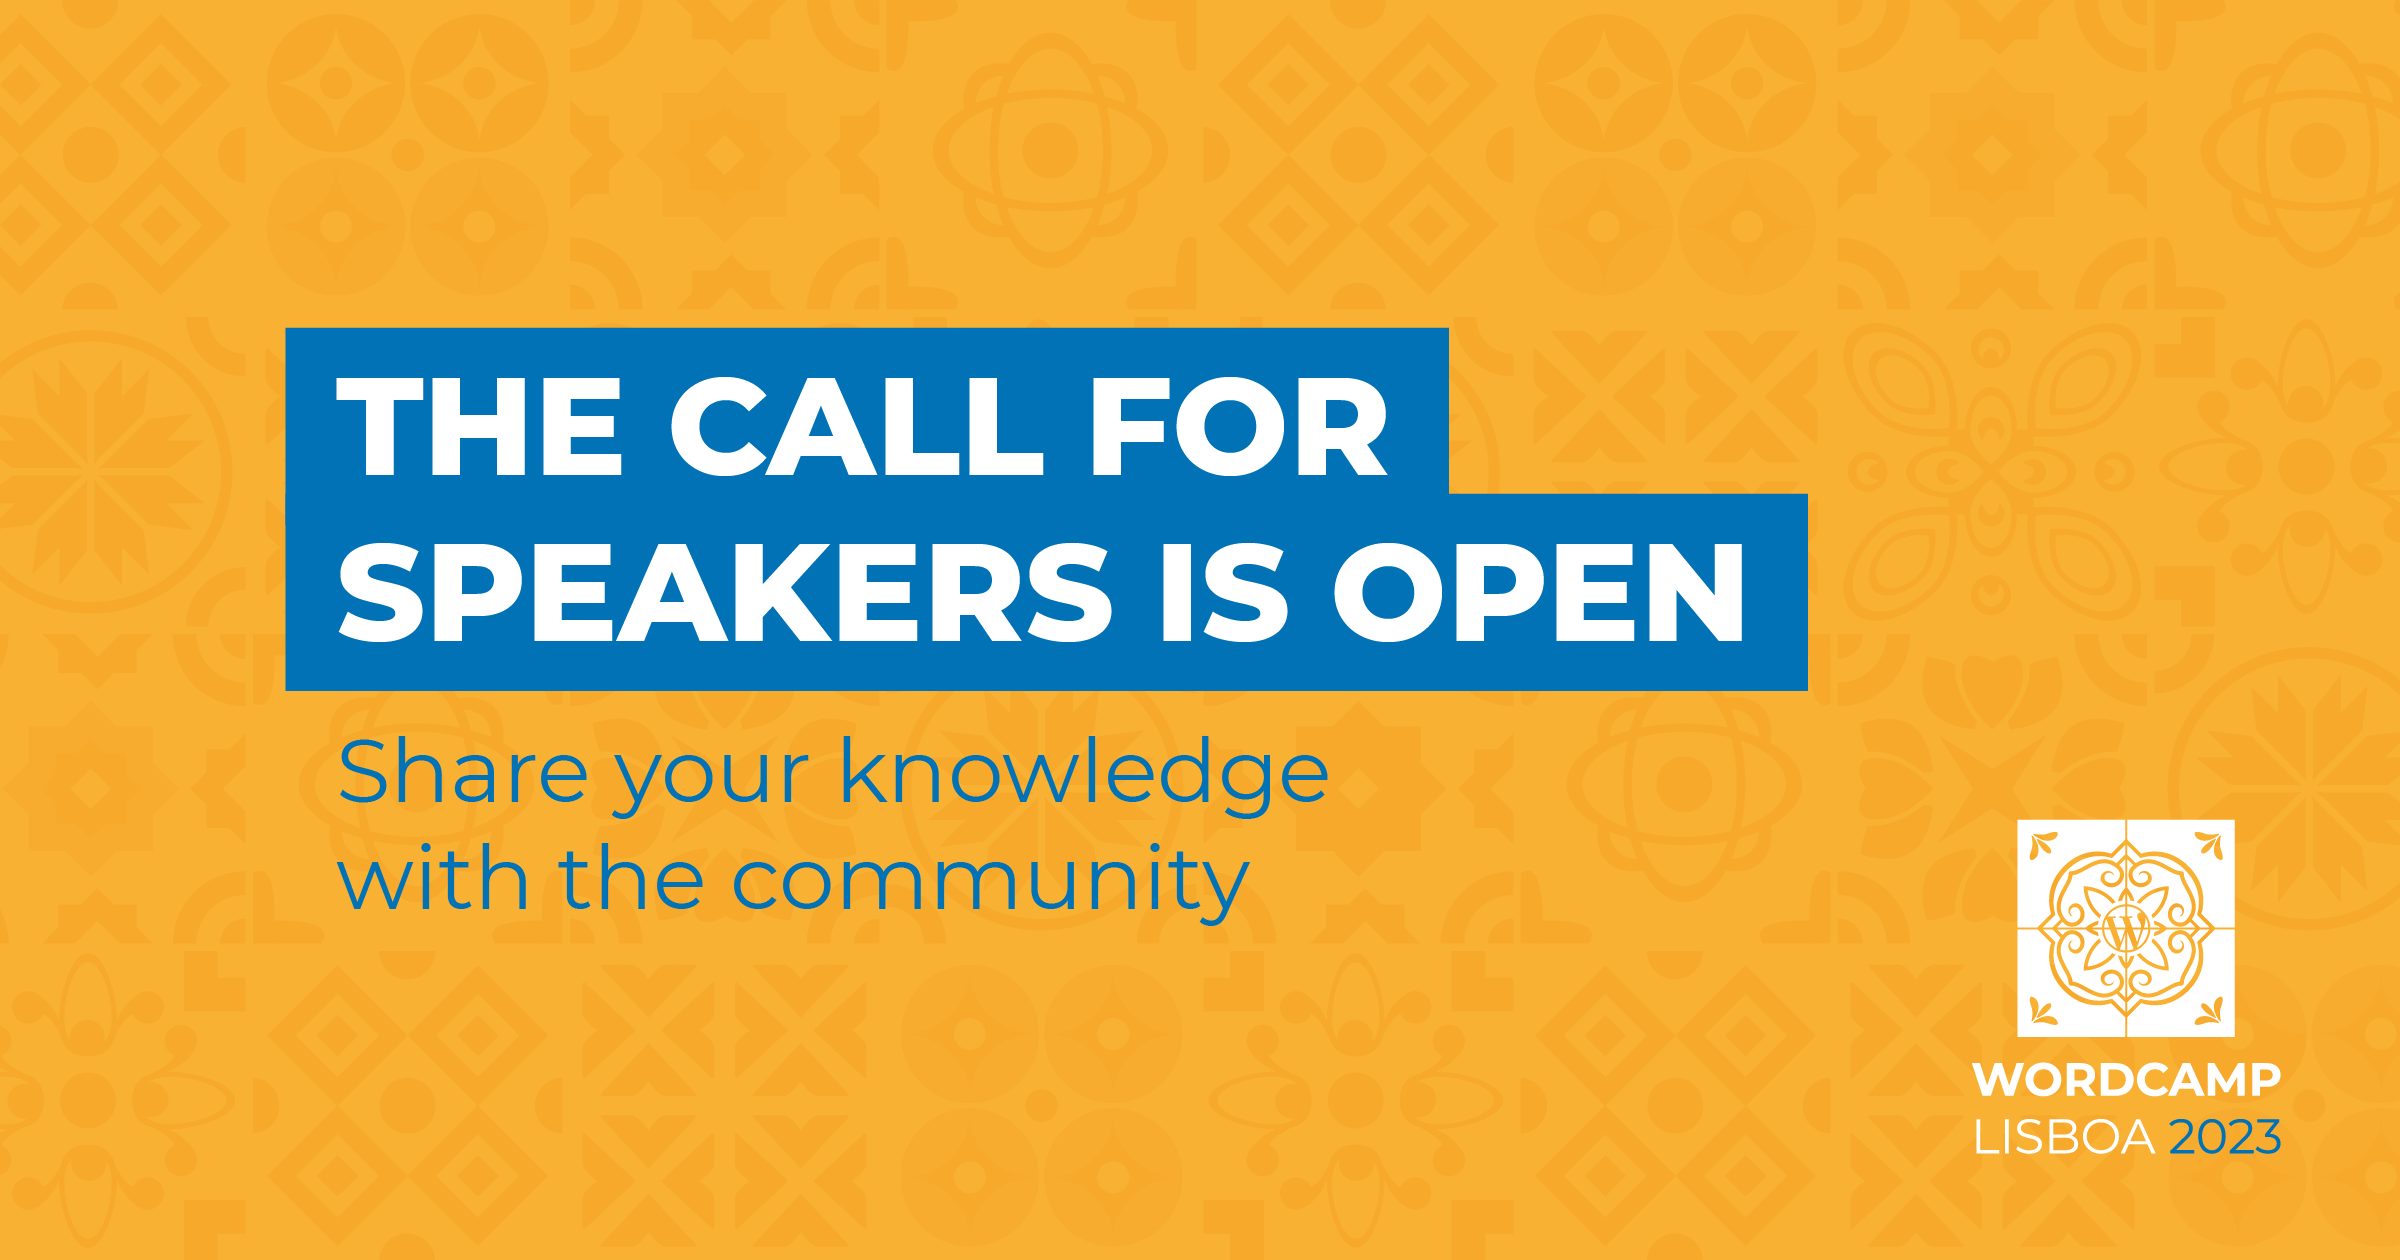 Last call for speakers!